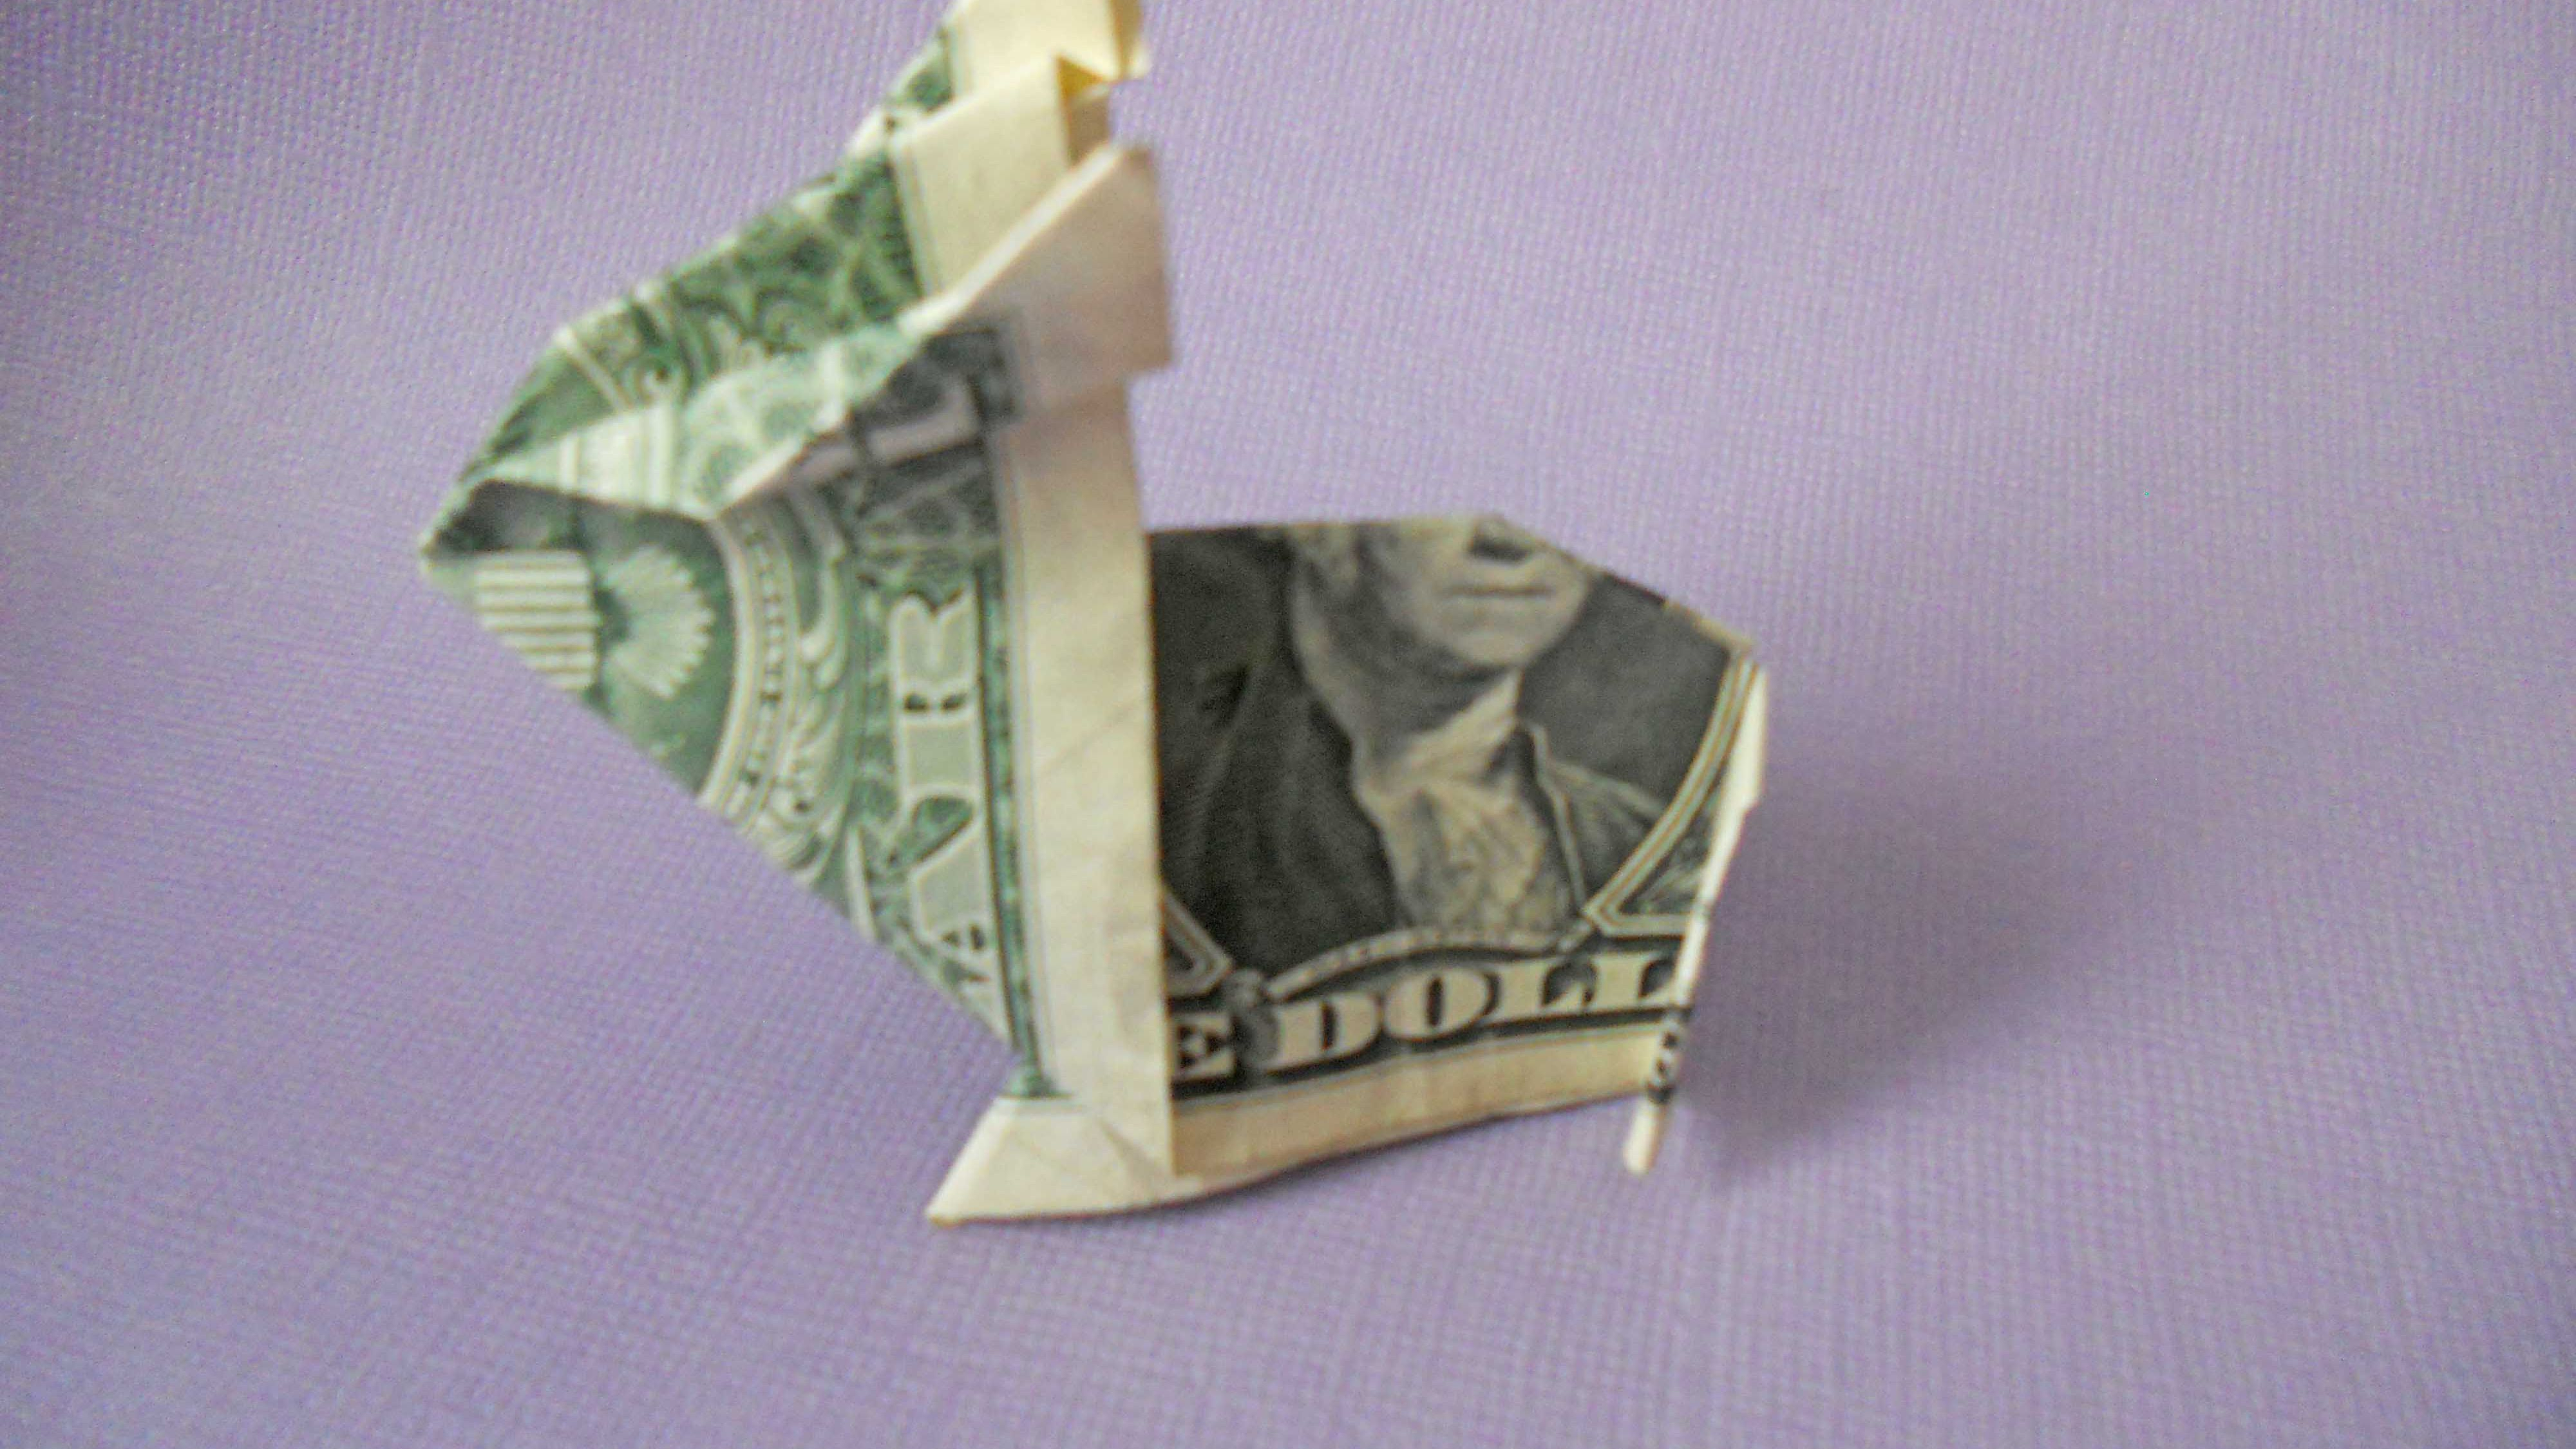 Money Bracelet Origami How To Make A Crafty Origami Bunny Out Of Cash